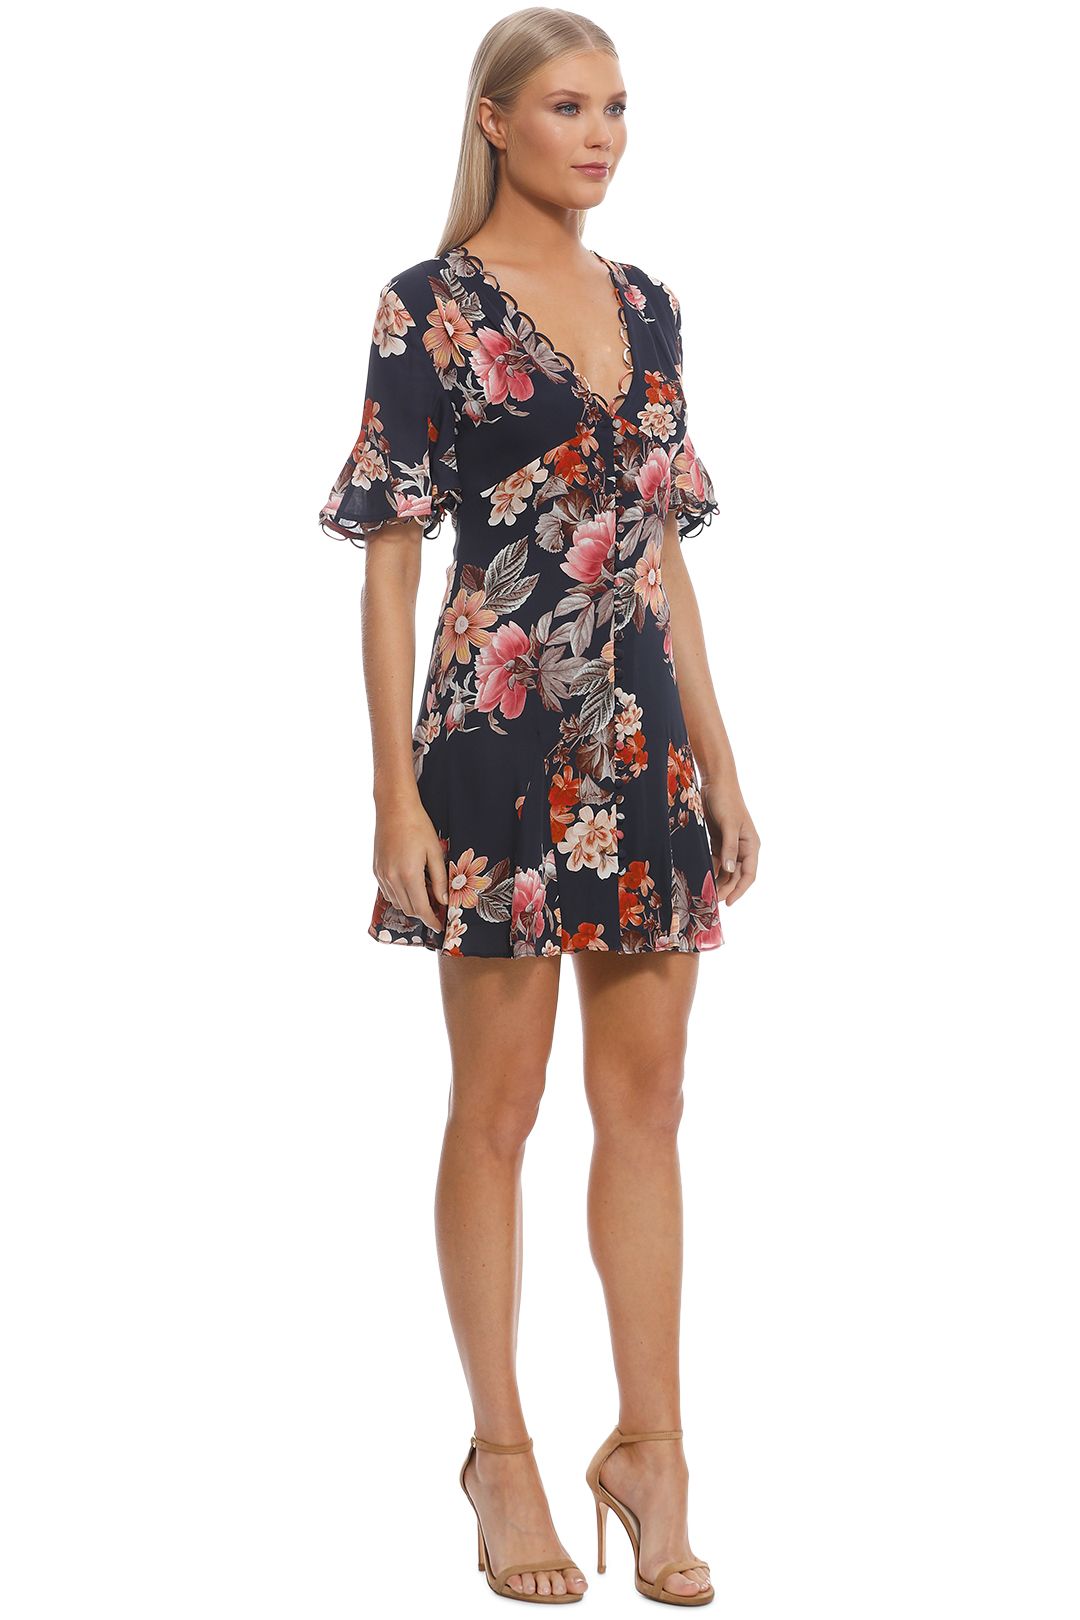 Nicholas The Label - Navy Rust Floral Godet Button Front Dress - Navy - Side